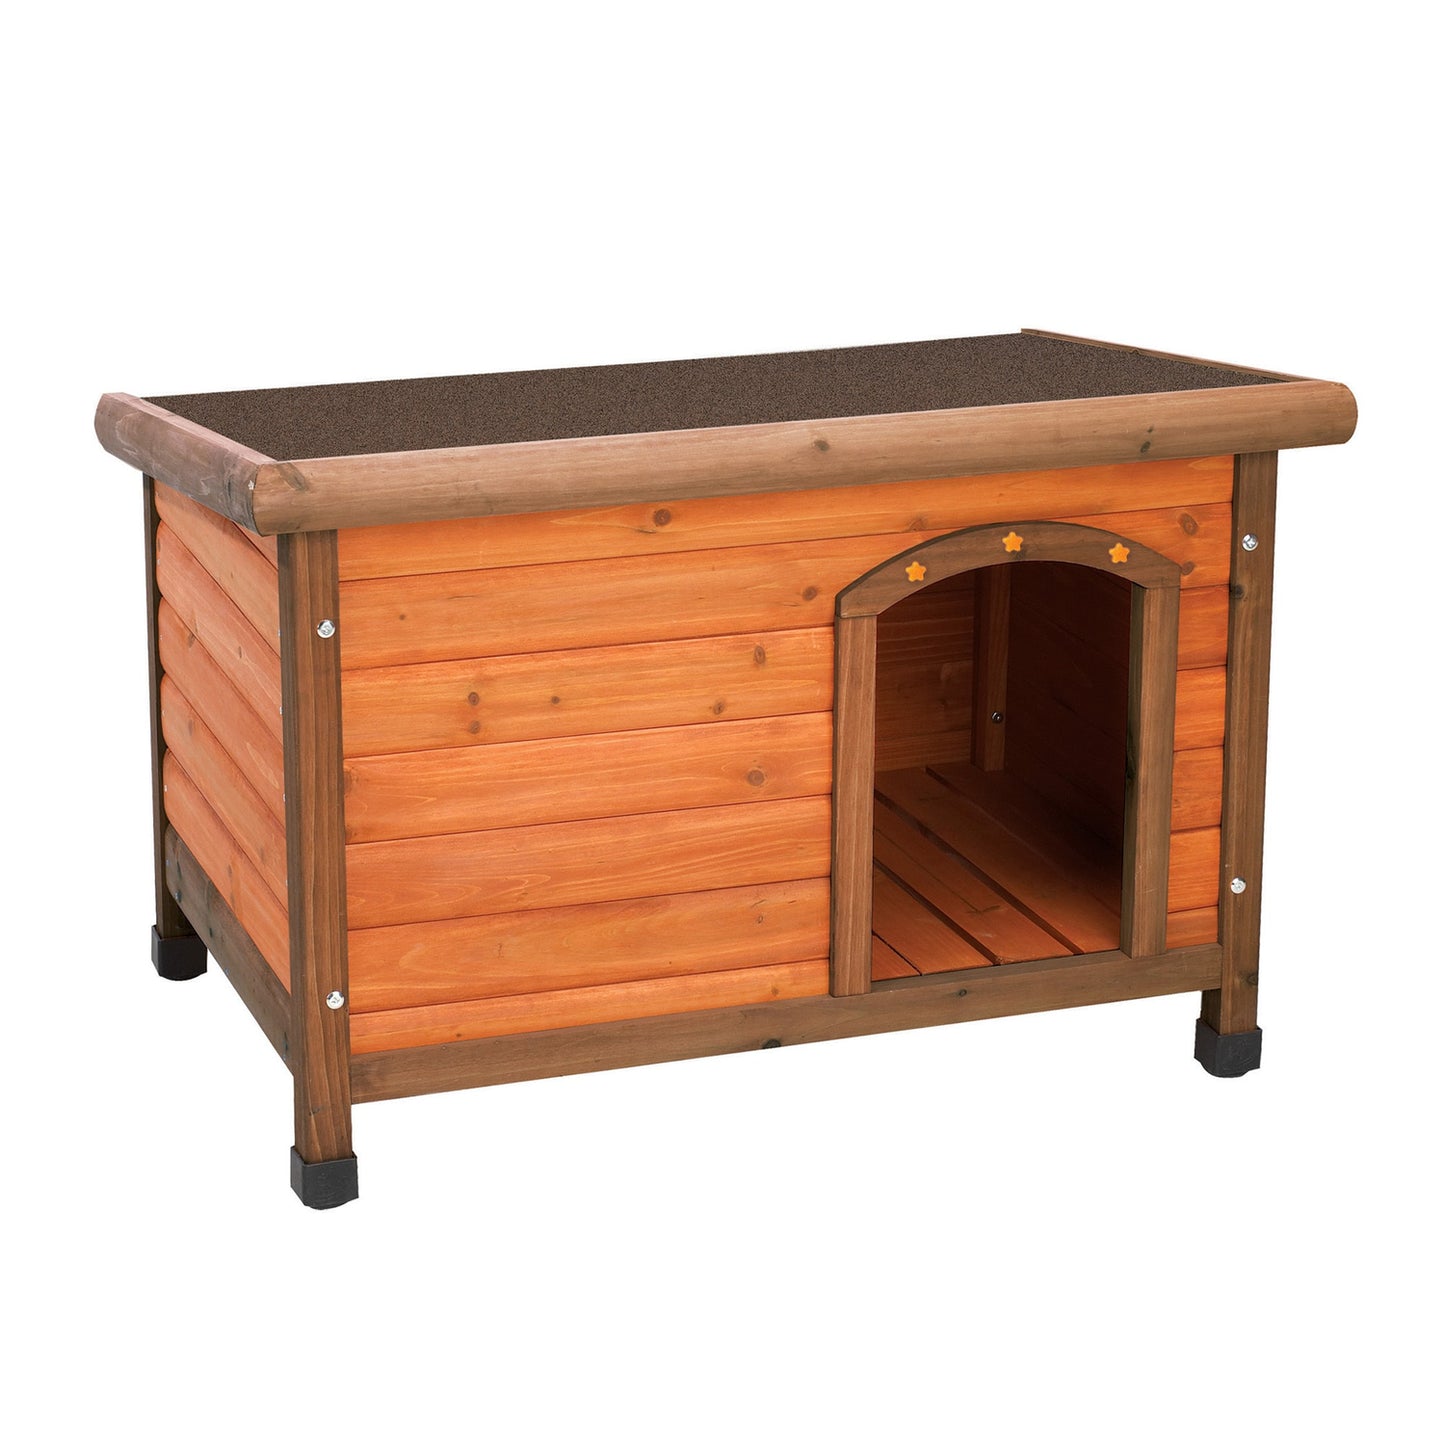 Ware Manufacturing Brown Wood Premium plus Small Dog House